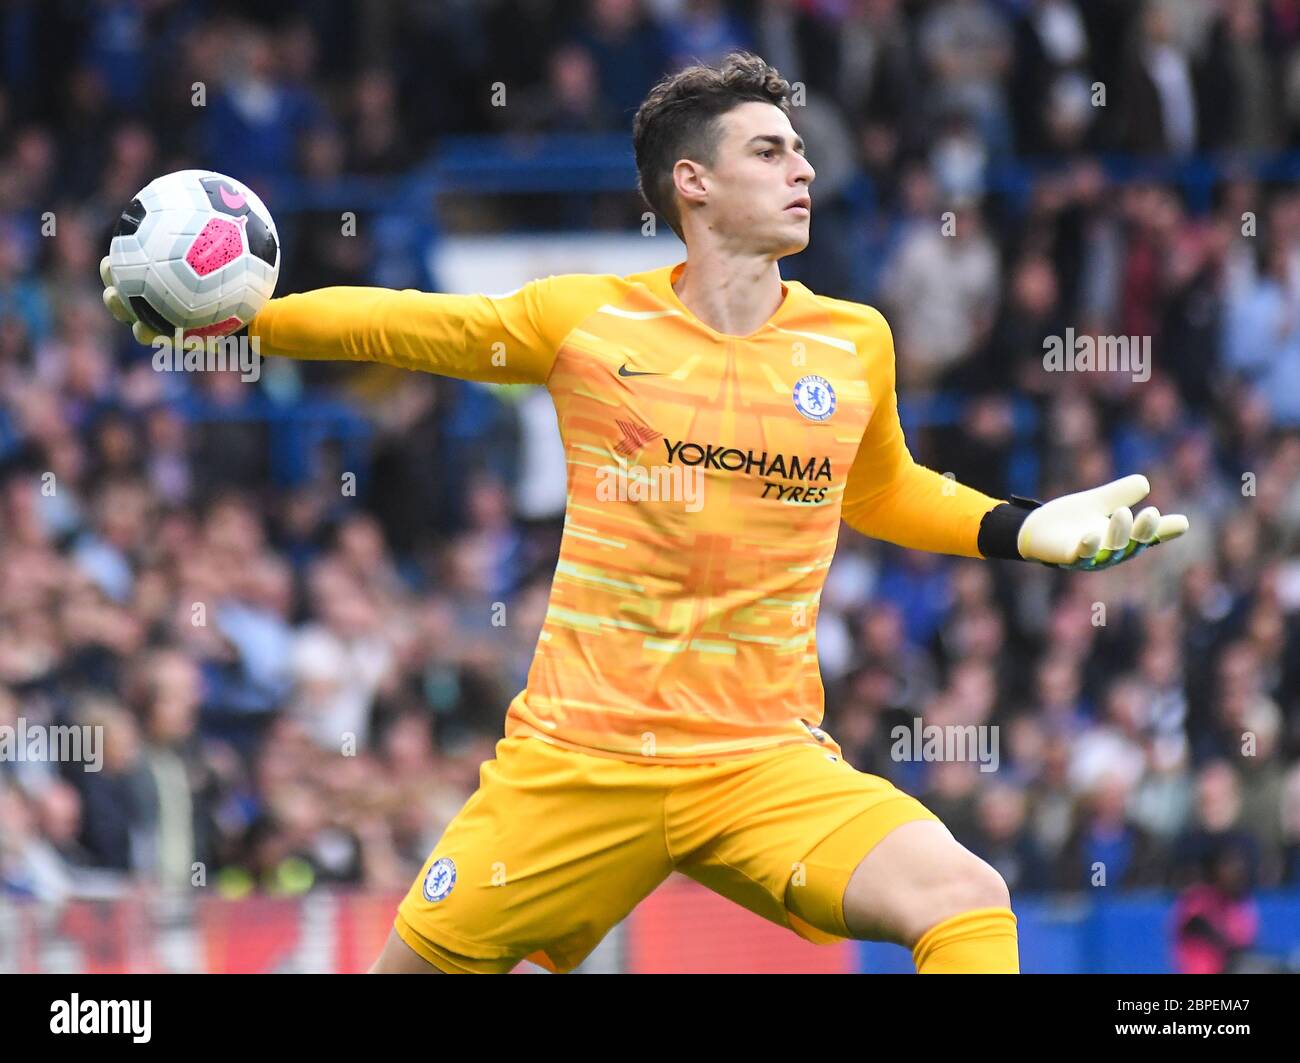 LONDON, ENGLAND - SEPTEMBER 22, 2019: Kepa Arrizabalaga of Chelsea pictured during the 2019/20 Premier League game between Chelsea FC and Liverpool FC at Stamford Bridge. Stock Photo